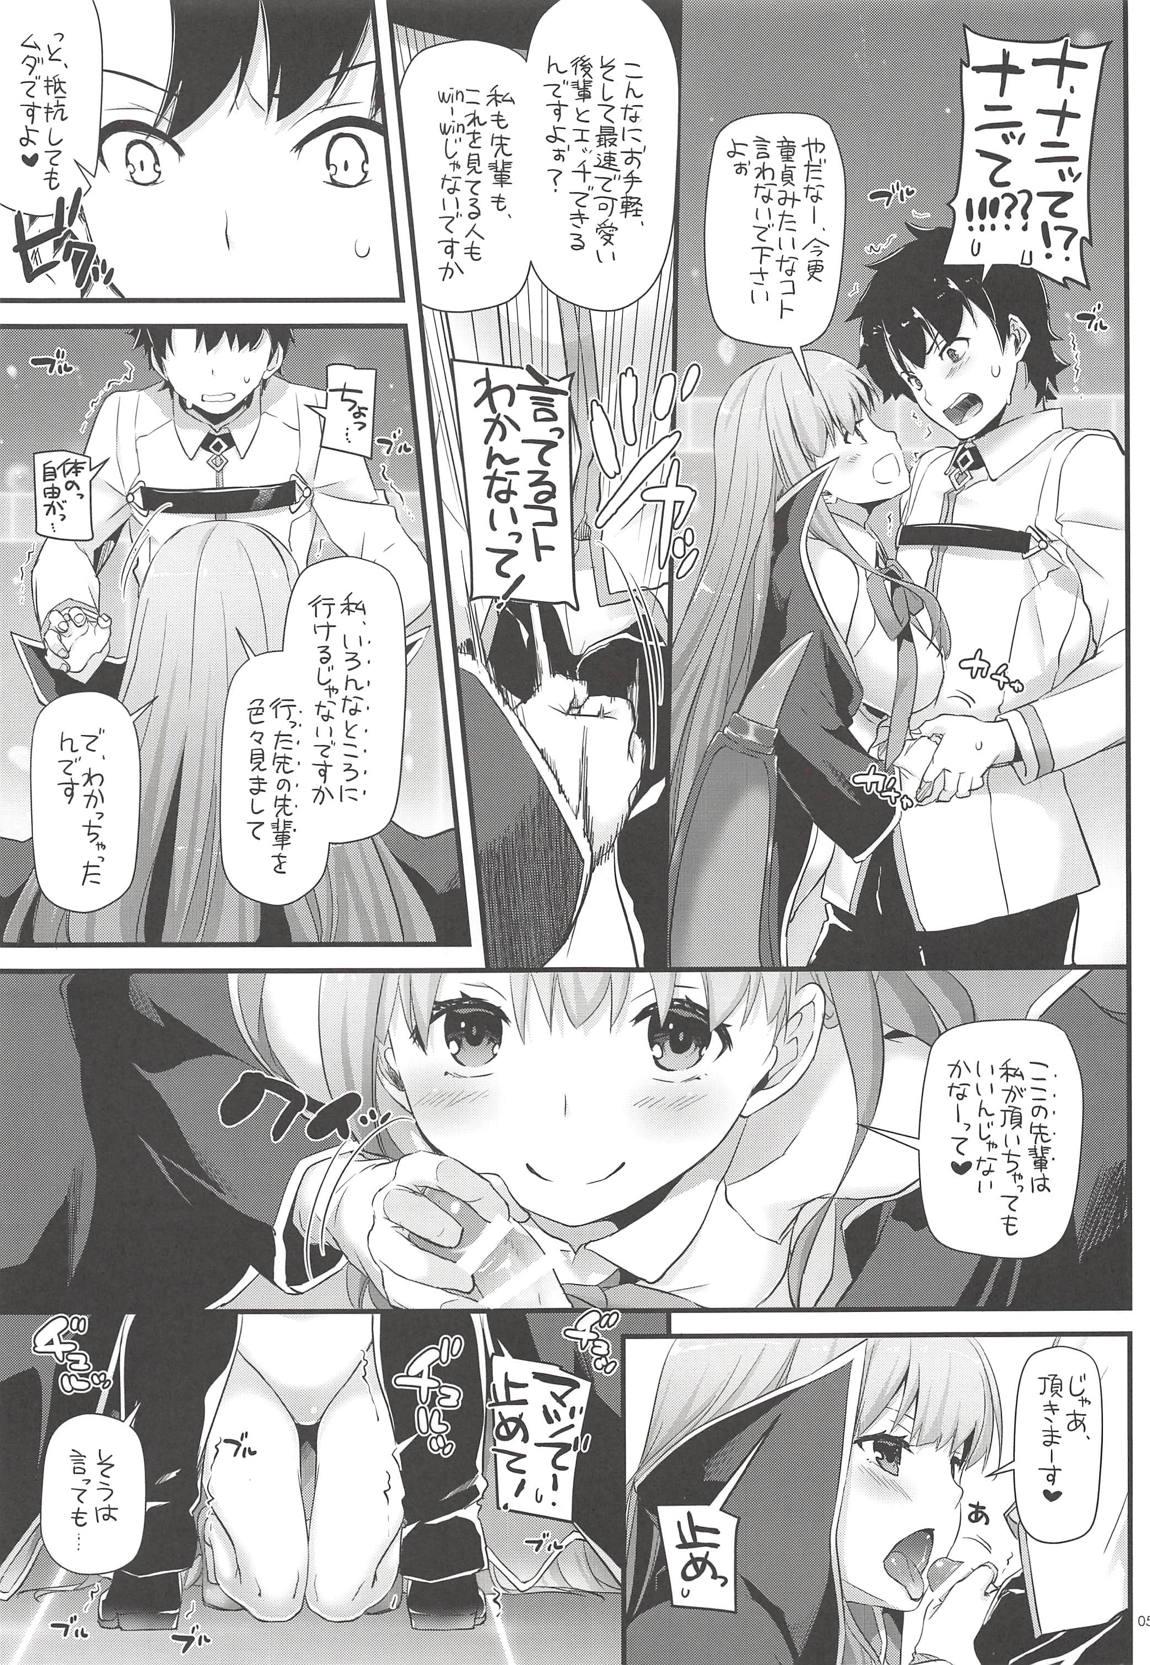 Teenager D.L. action 124 - Fate grand order Zorra - Page 4